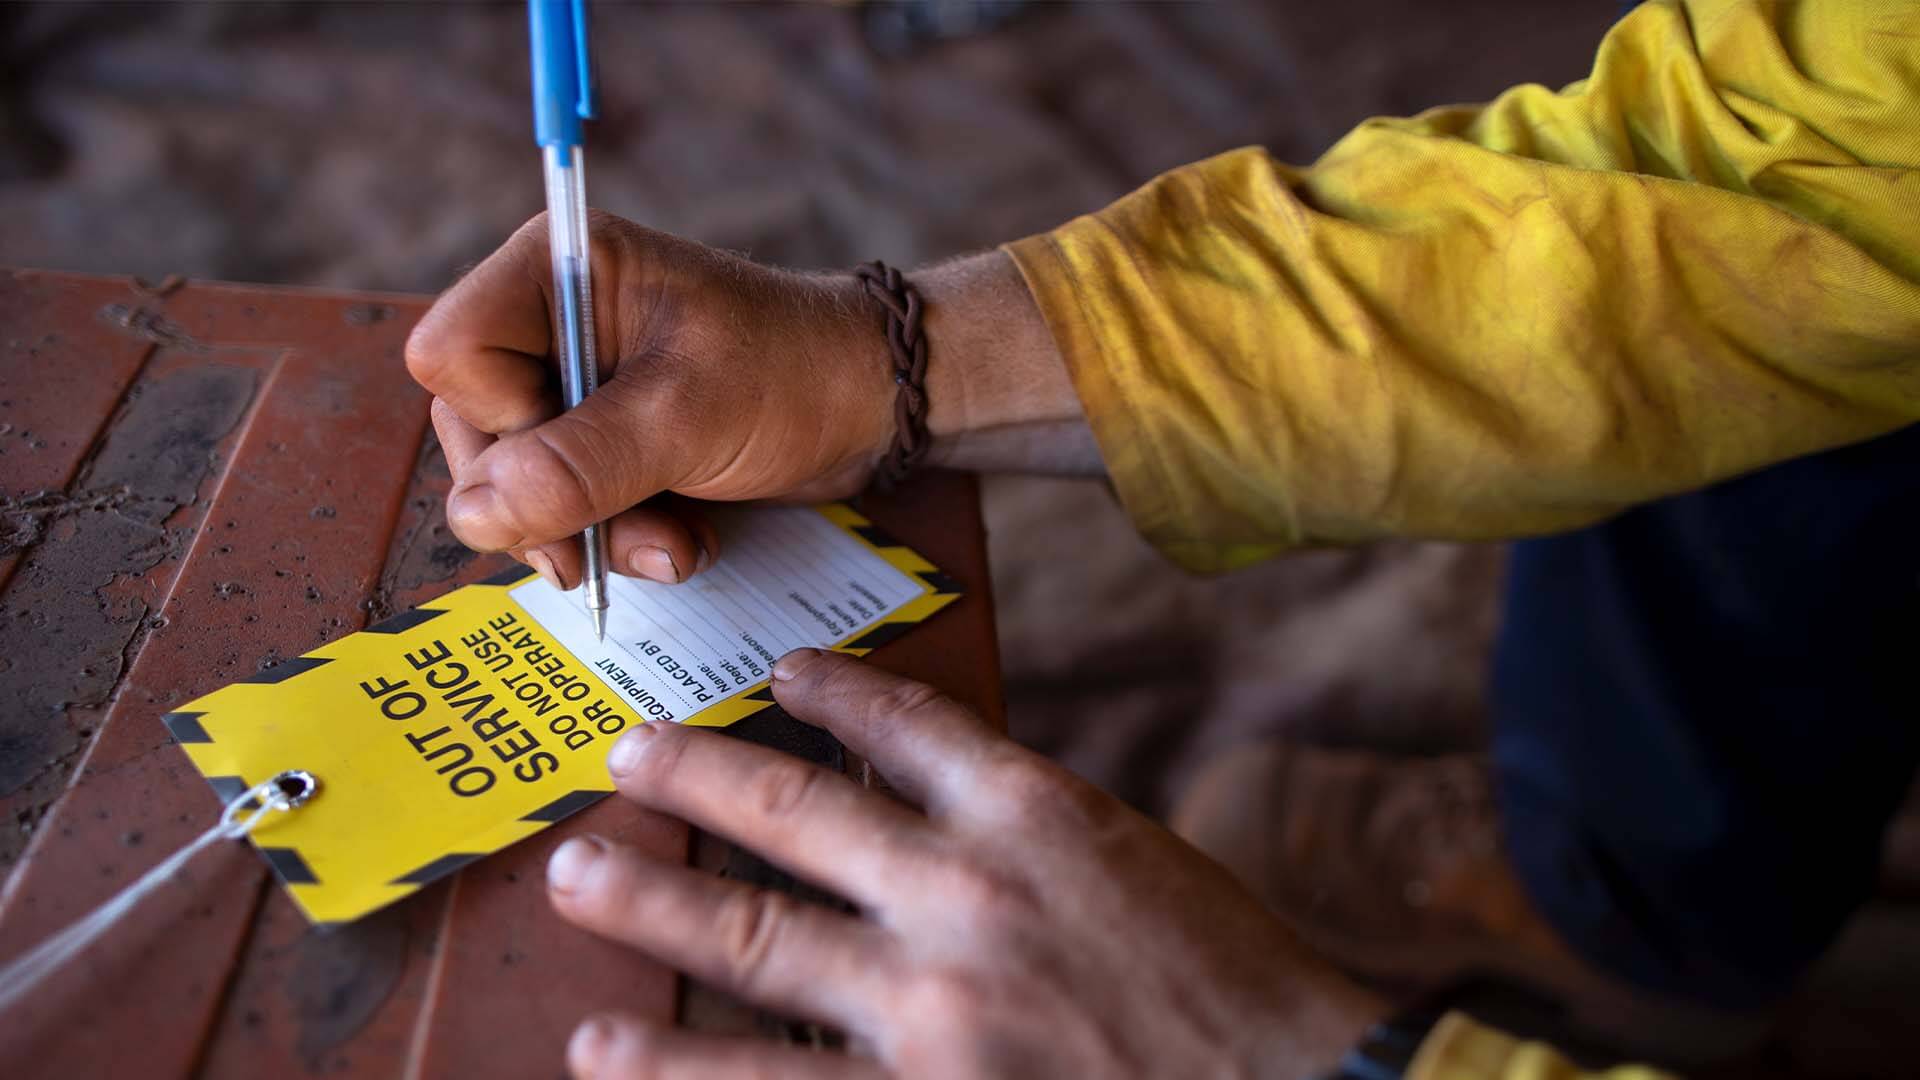 Up close photo of a construction or factory worker placing a note on a defective or dangerous product like a power tool to let people know not use it